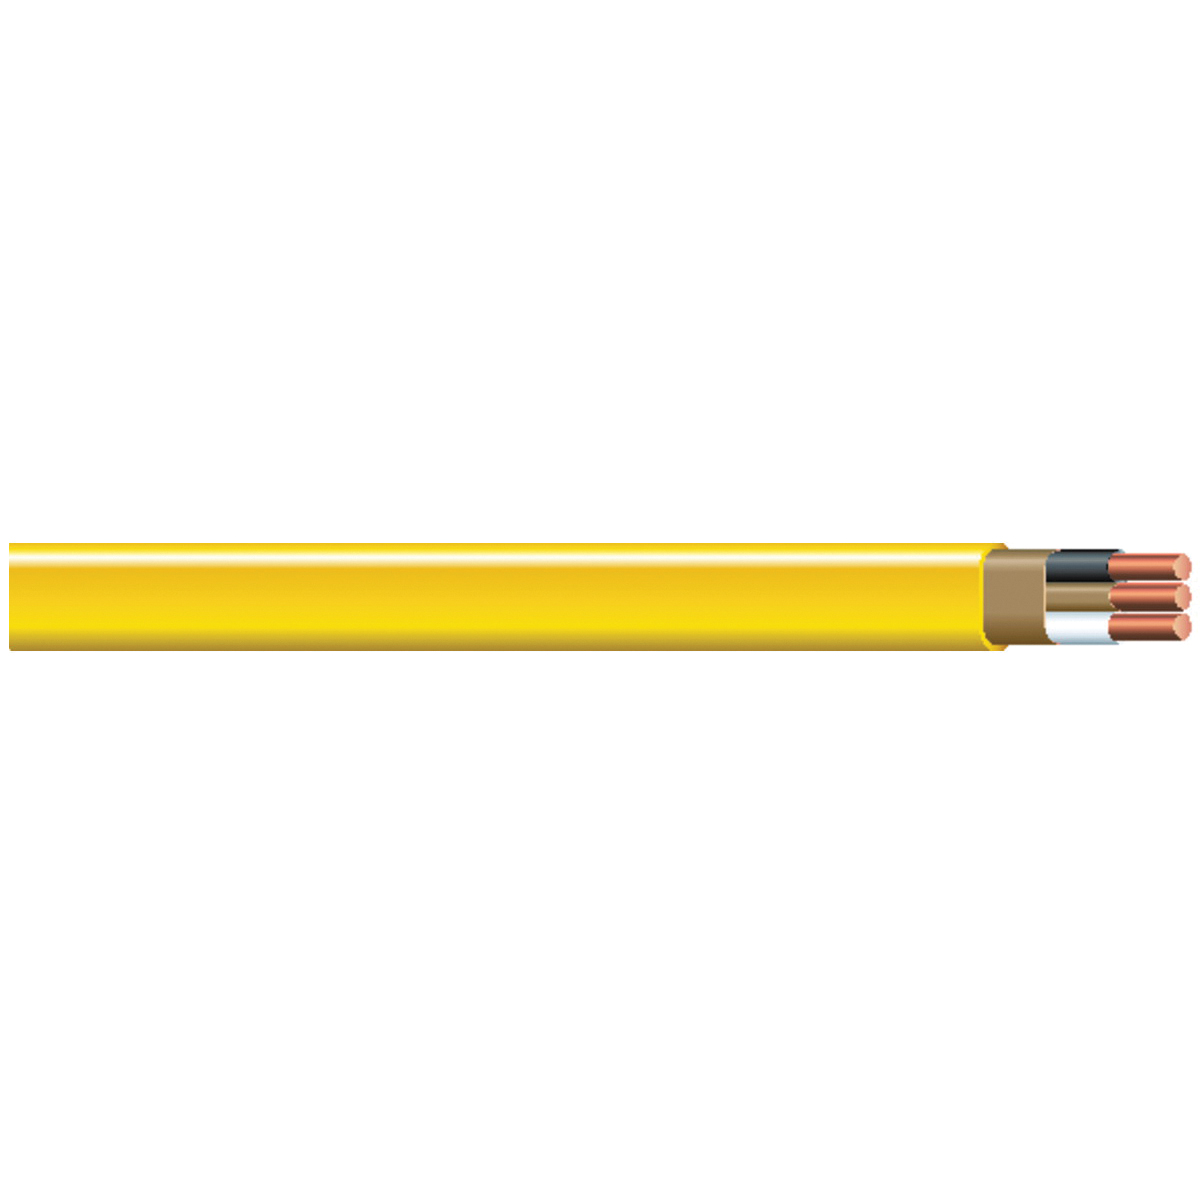 Romex® NM-B Series RX122WG1000 Non-Metallic Sheathed Cable, 600 V, 2-Conductor, Stranded, 1000 ft L, Yellow Jacket